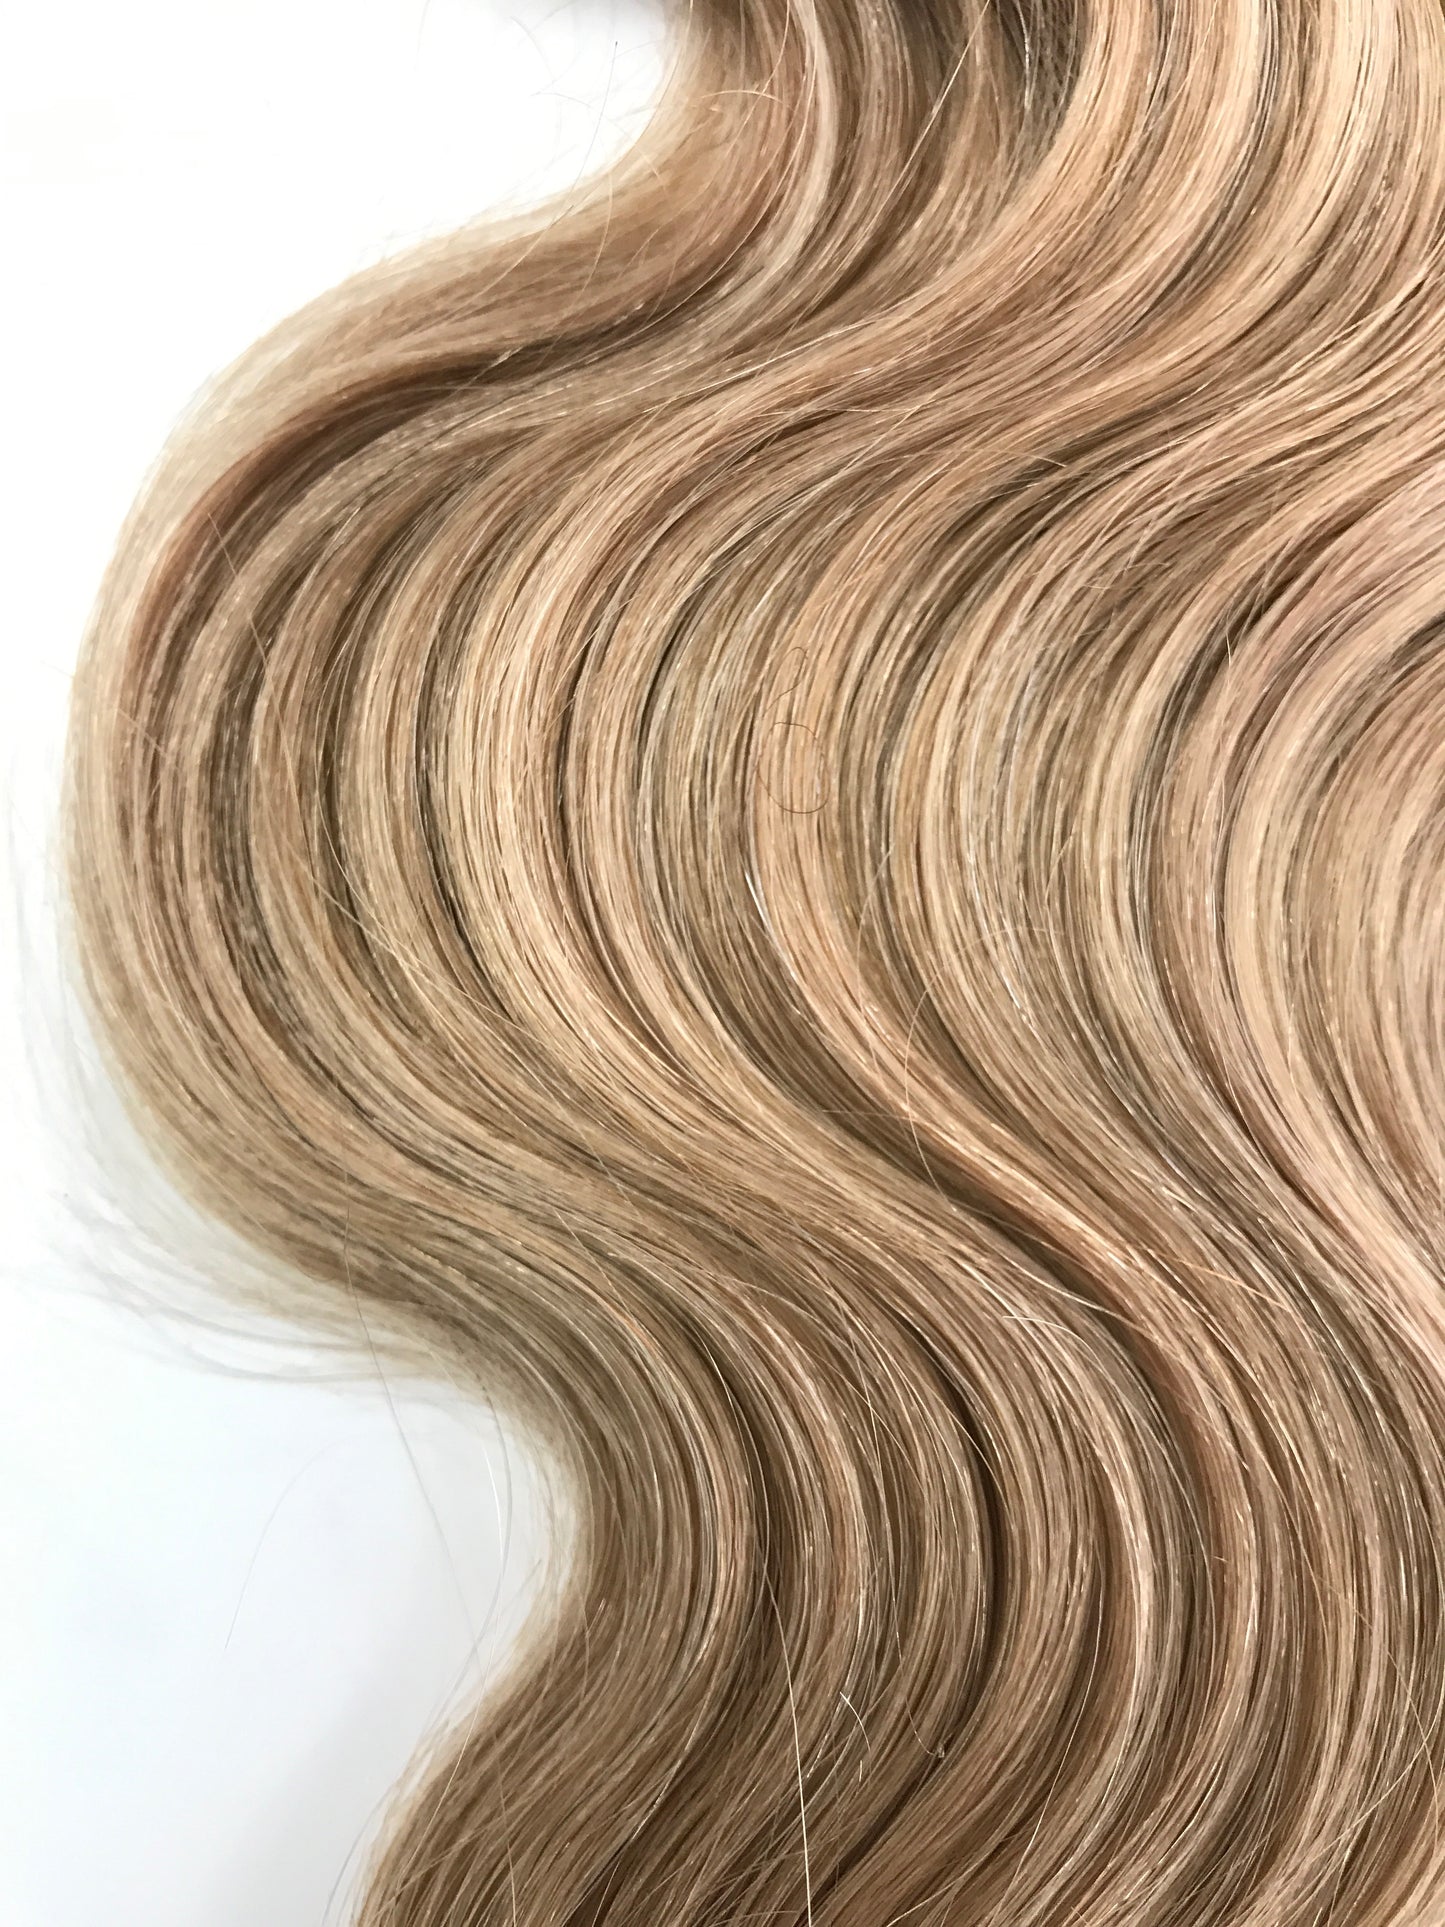 European Virgin Remy Human Hair, Clip In, 12 Inches, Wavy, Quick Shipping!